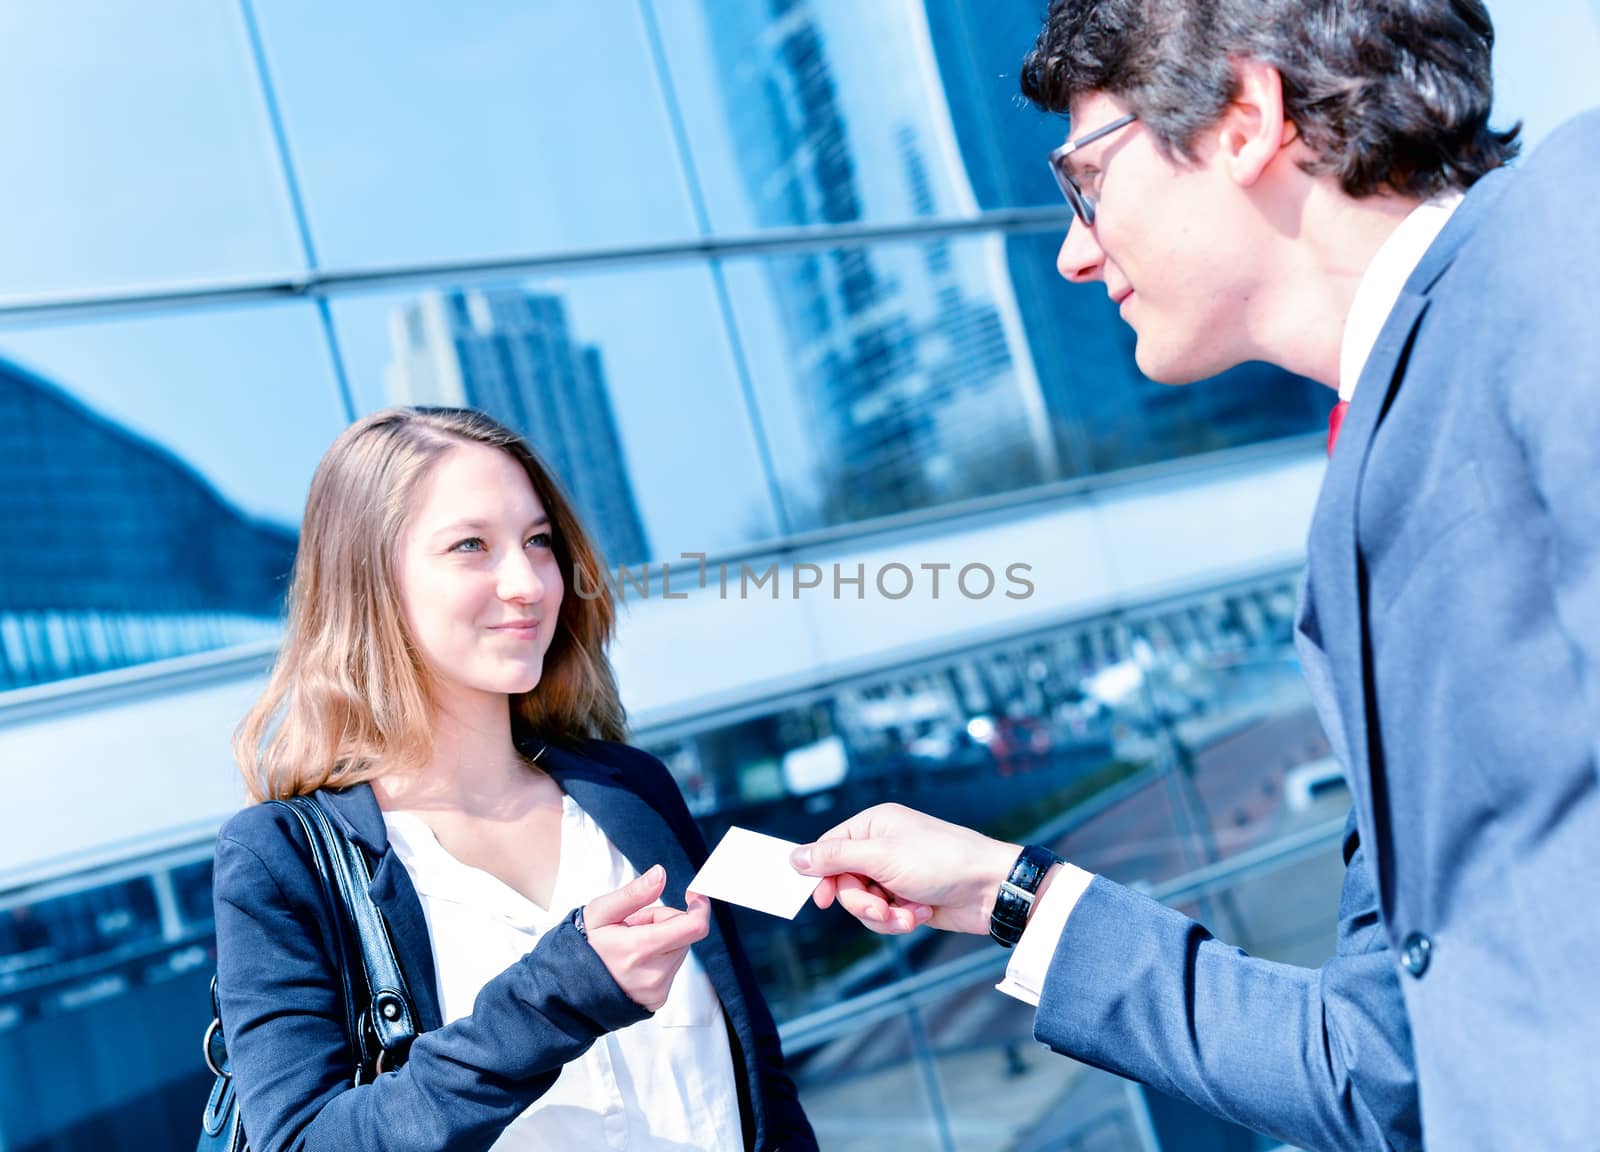 Nice portrait of Junior executives dynamics exchange their business cards in front buildings